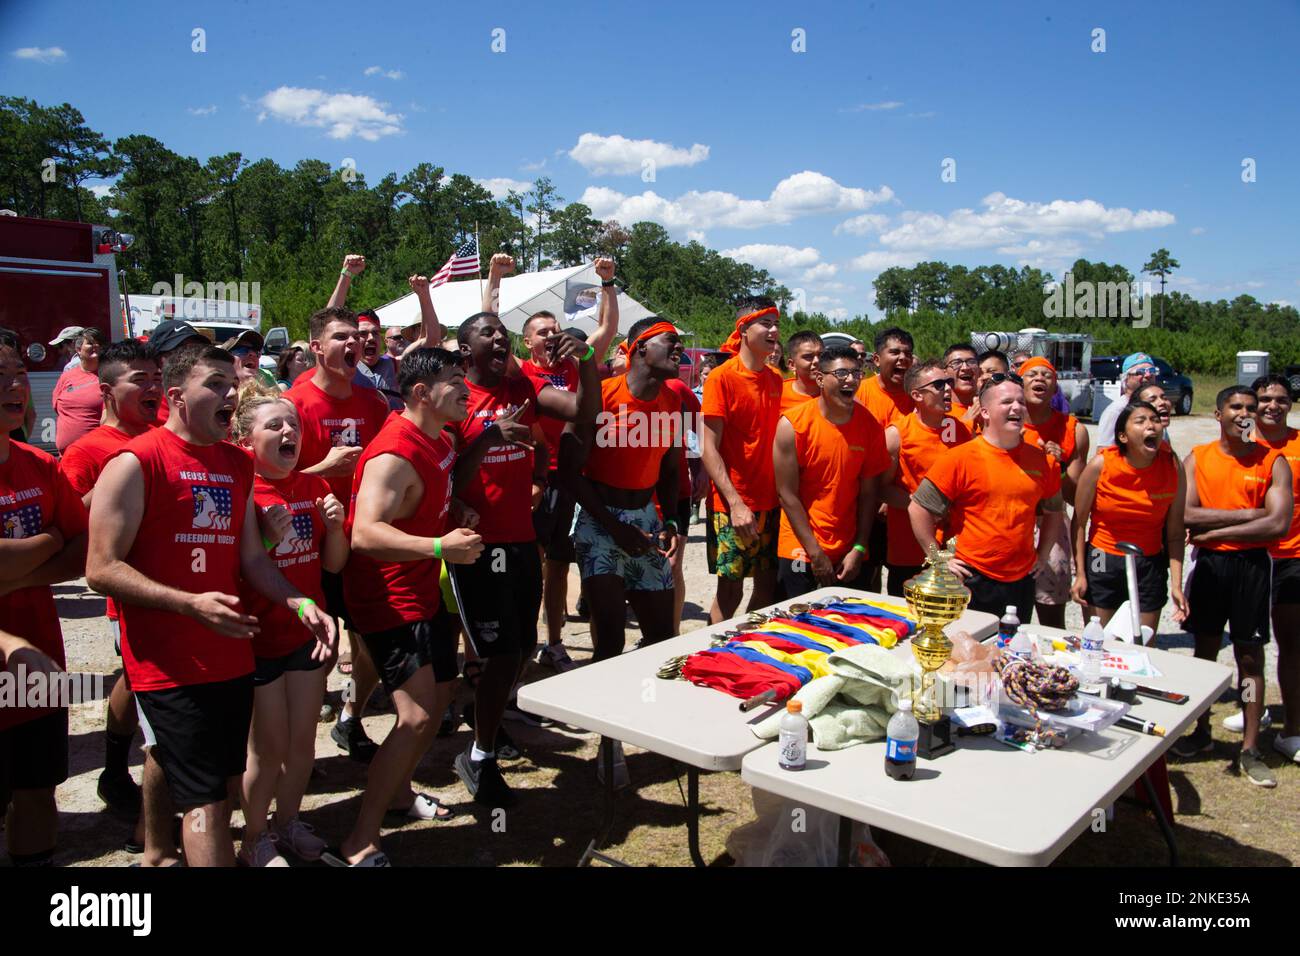 Paddle teams with the Single Marine Program receive the result of their final race at the 12th Annual Dragon Boat Races and Festival in Oriental, North Carolina, Aug. 13, 2022. The Neuse Winds Freedom Riders came in first place by less than one second. Stock Photo